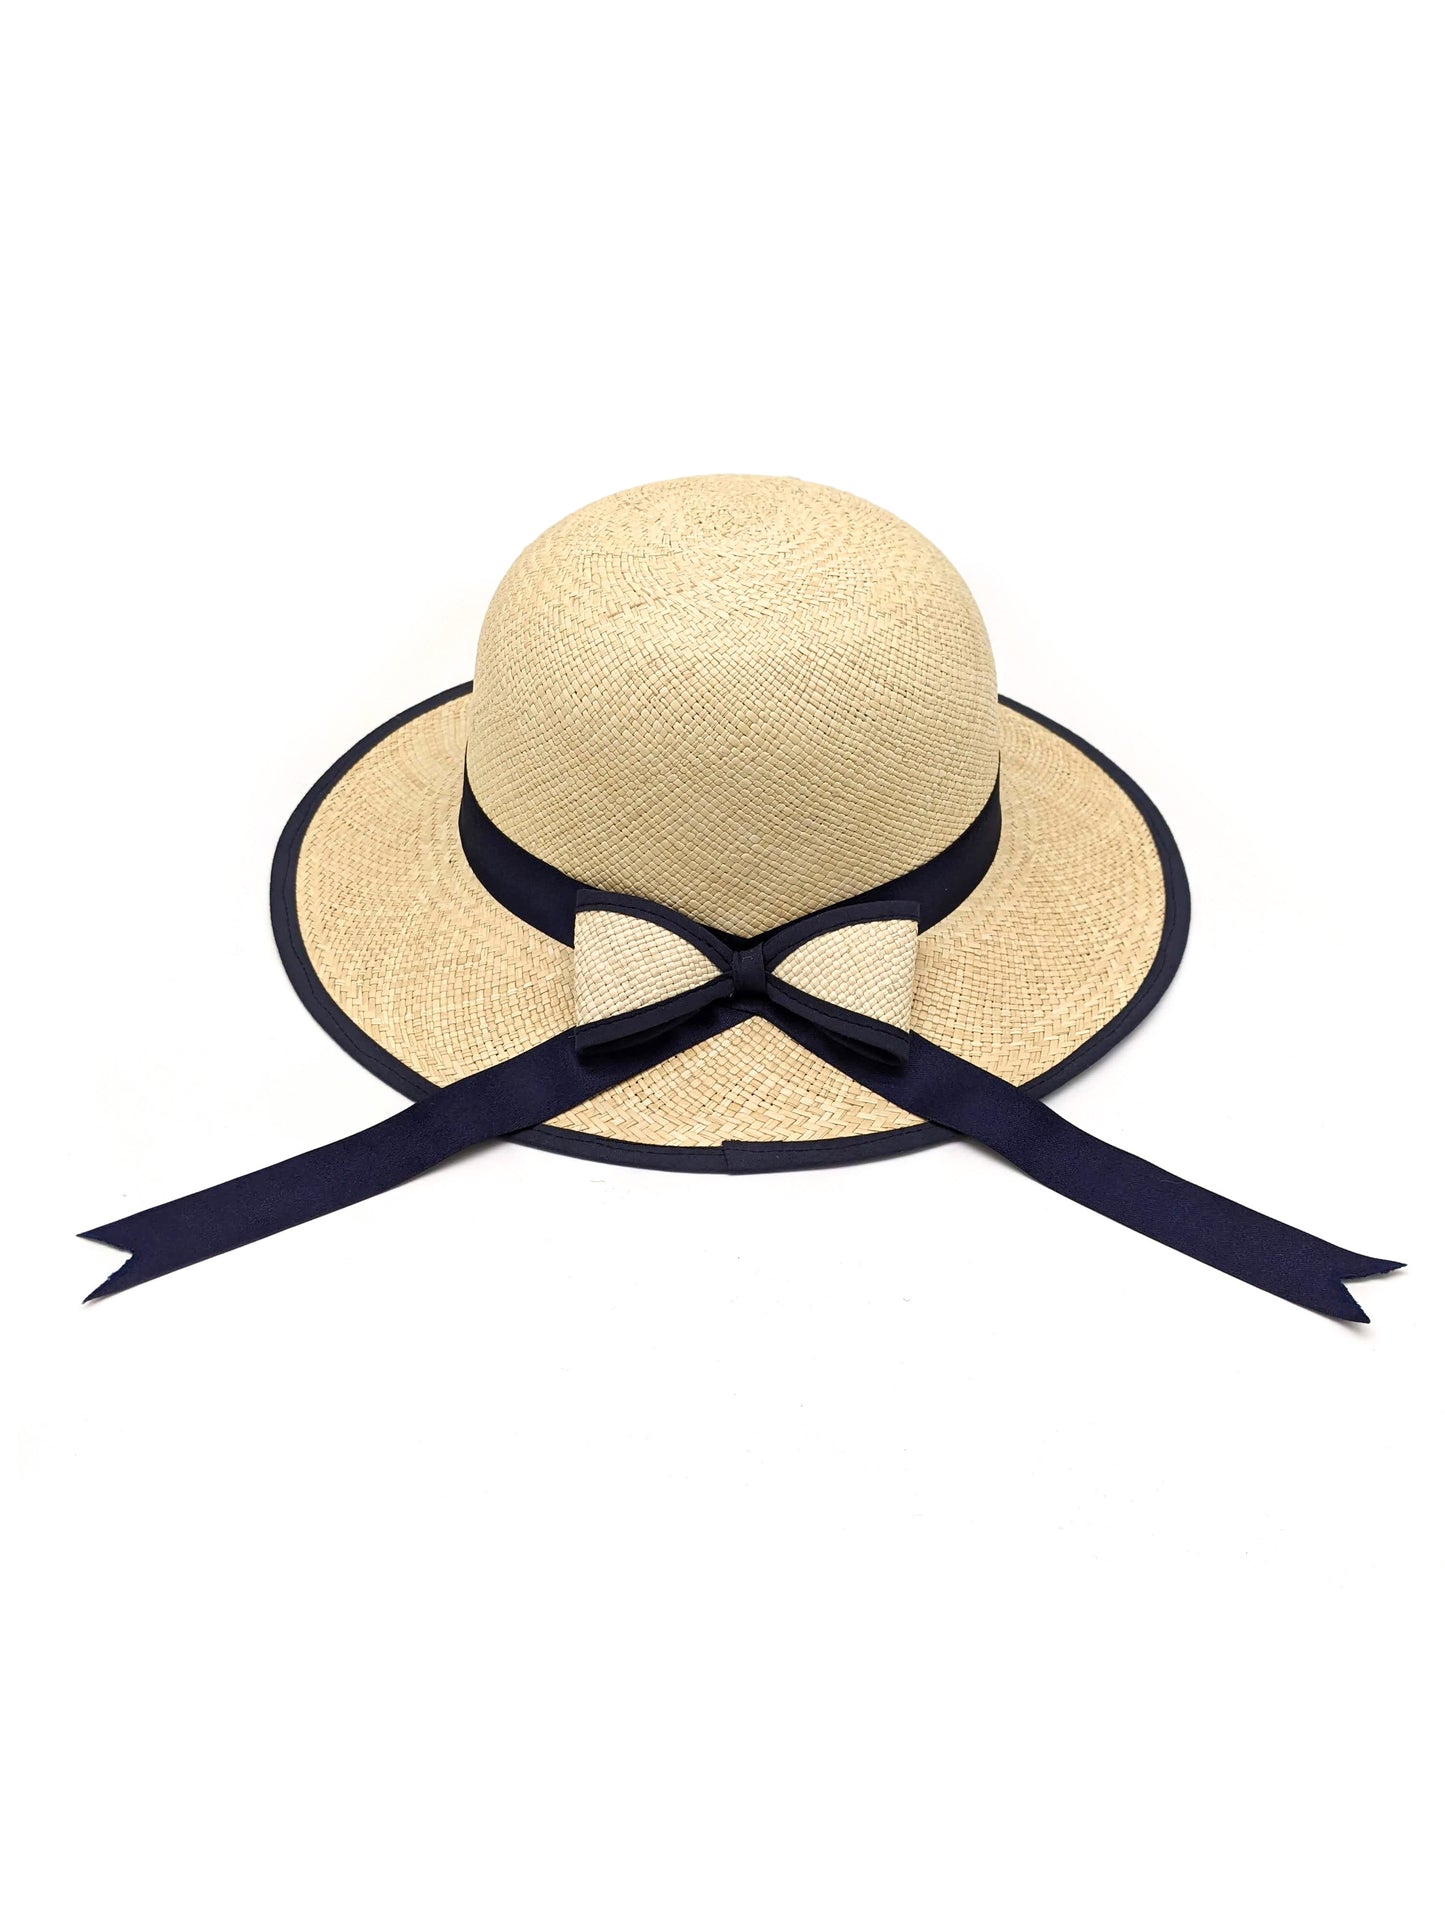 Ladies Panama Hat with Navy Blue Bow